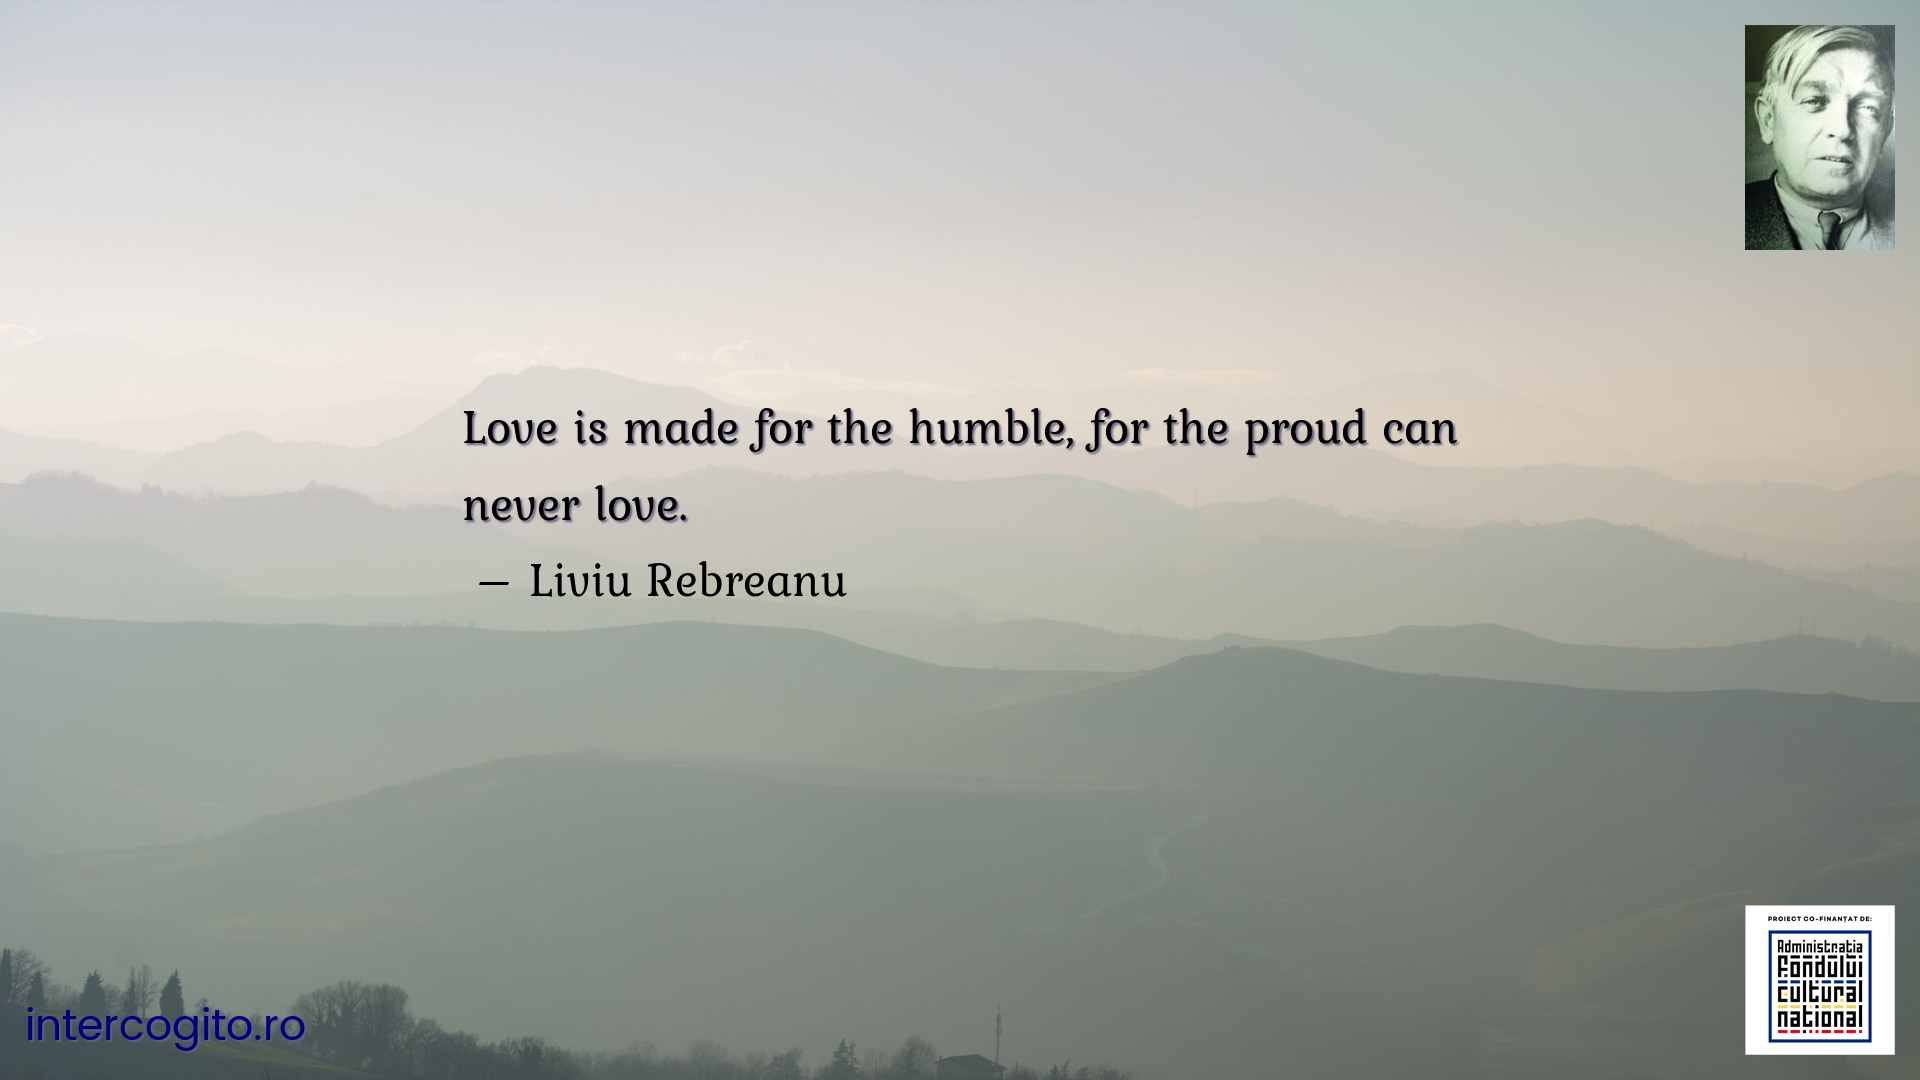 Love is made for the humble, for the proud can never love.